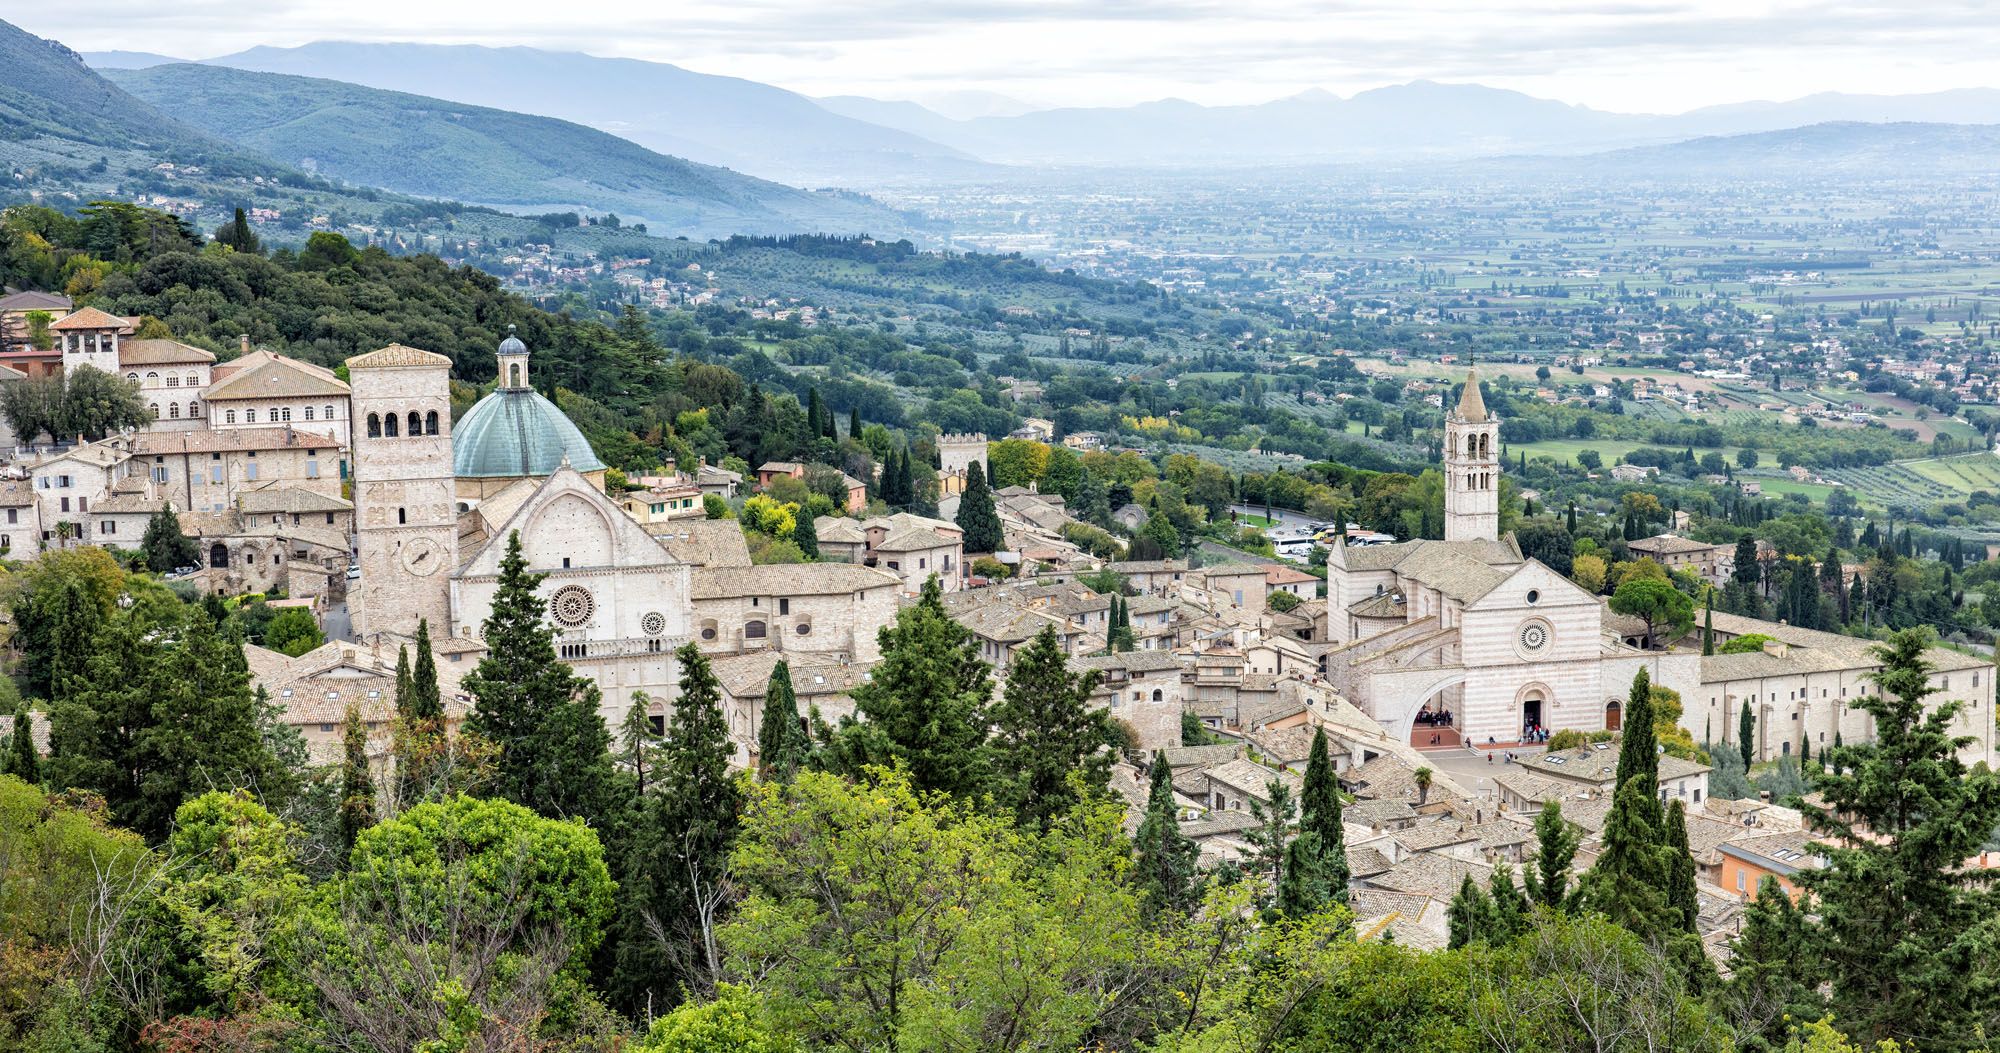 Featured image for “One Day in Assisi, Italy: Walking Tour of the Historic City Center”